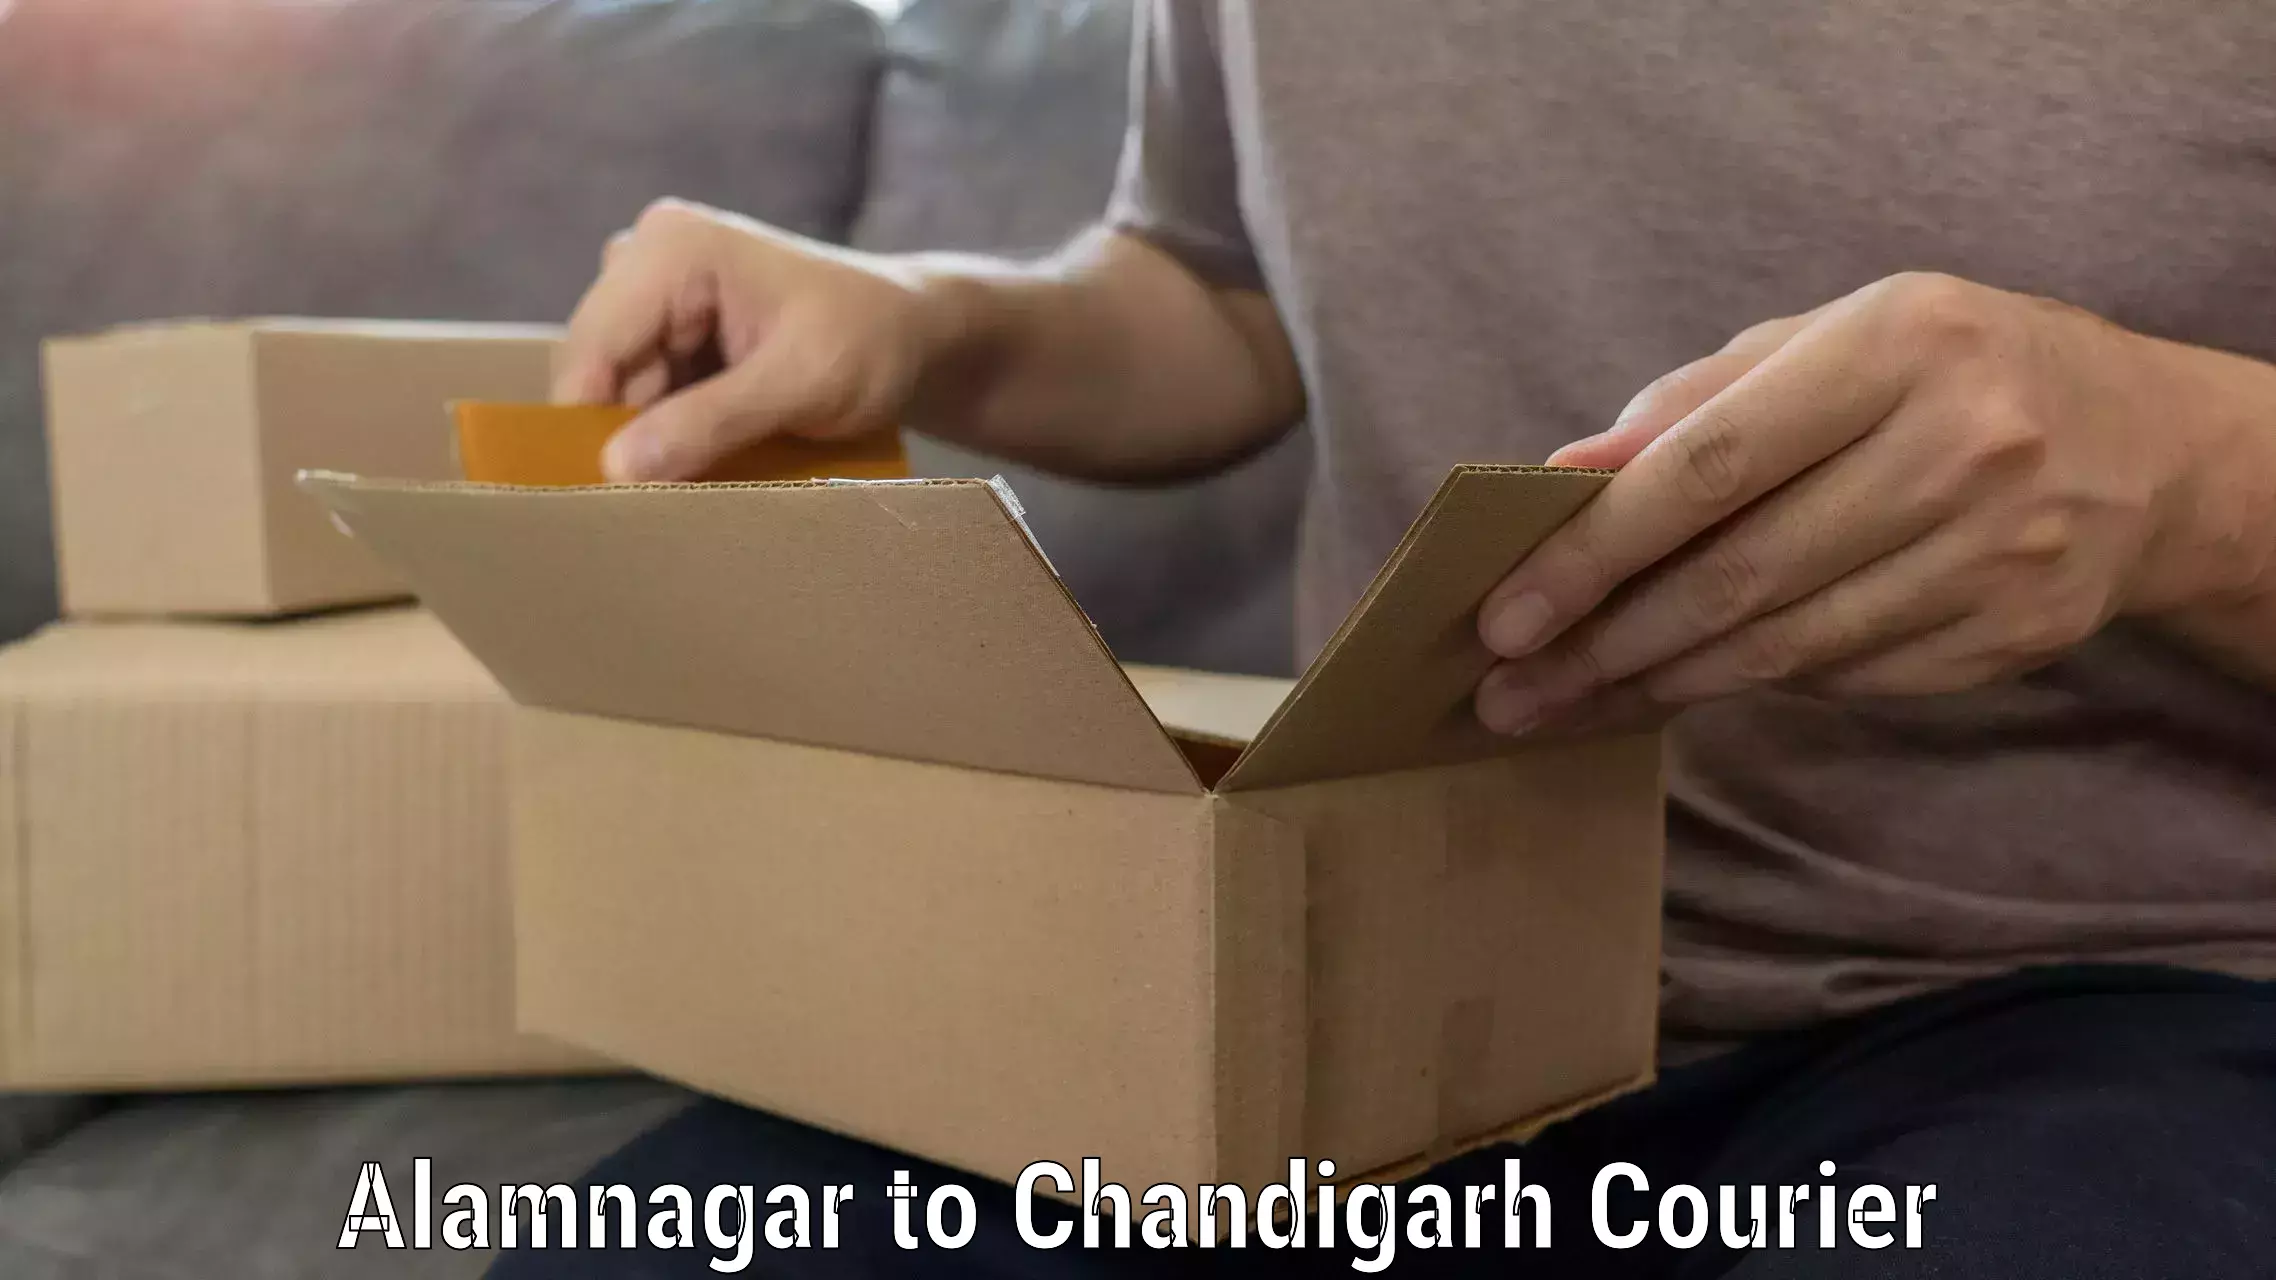 Reliable relocation services Alamnagar to Chandigarh